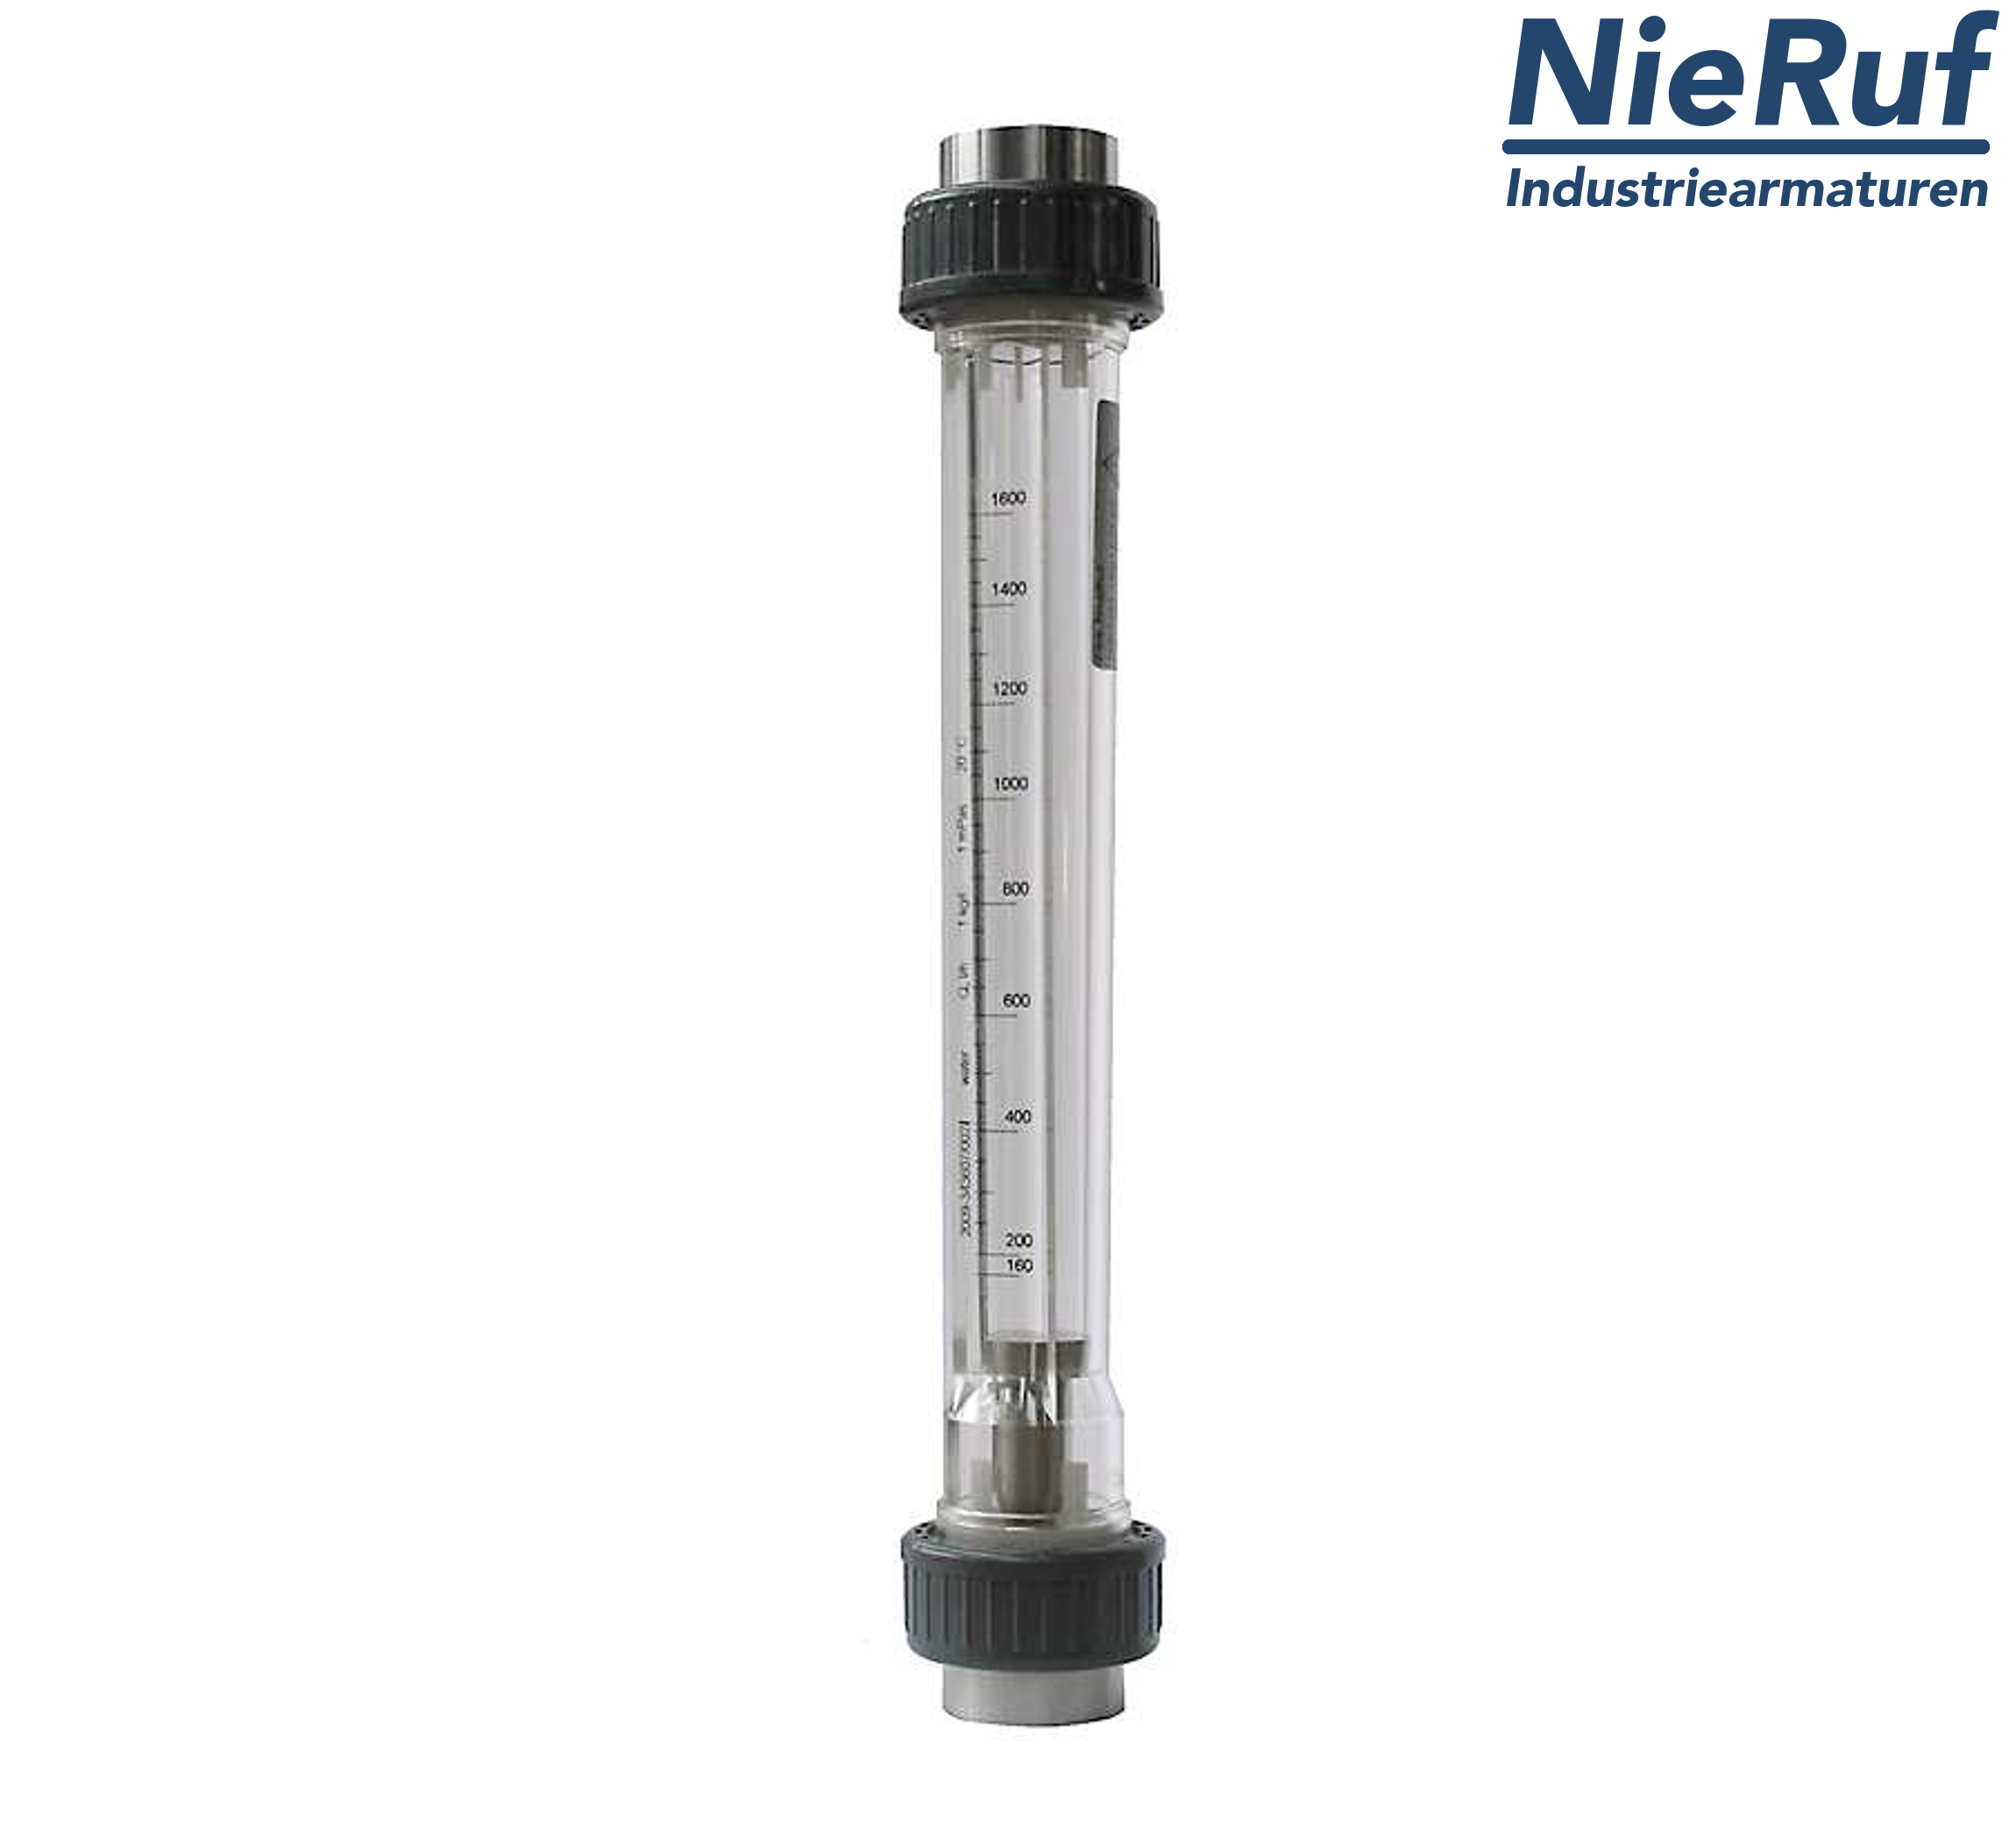 Variable area flowmeter 3/4" inch 65.0 - 650 l/h water FKM